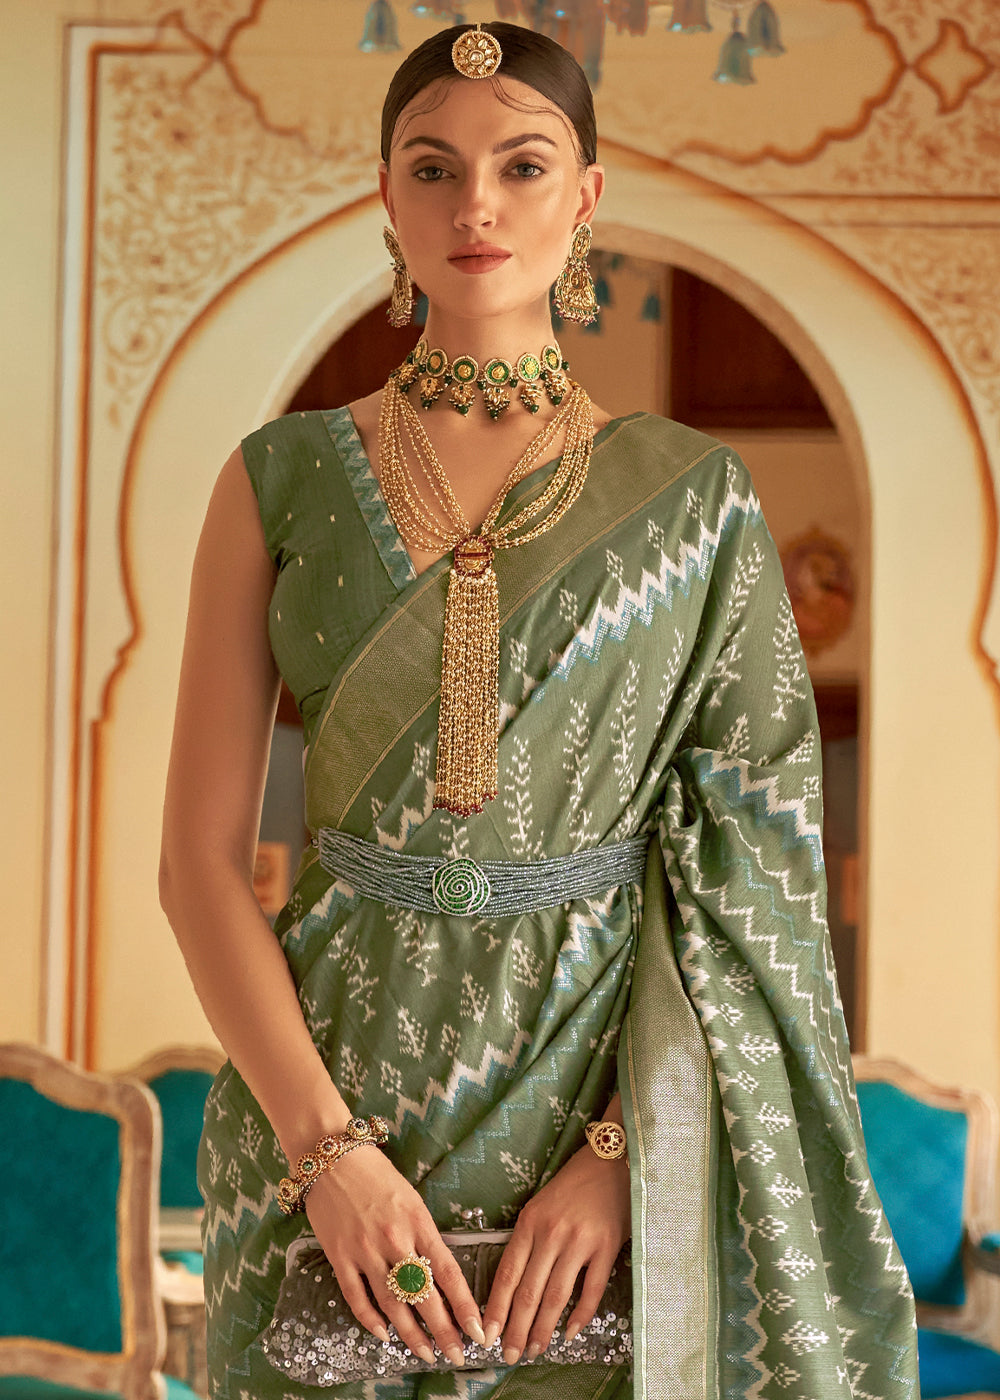 Emerald Enchantment: A Green Patola Woven Silk Saree Fit for Goddesses